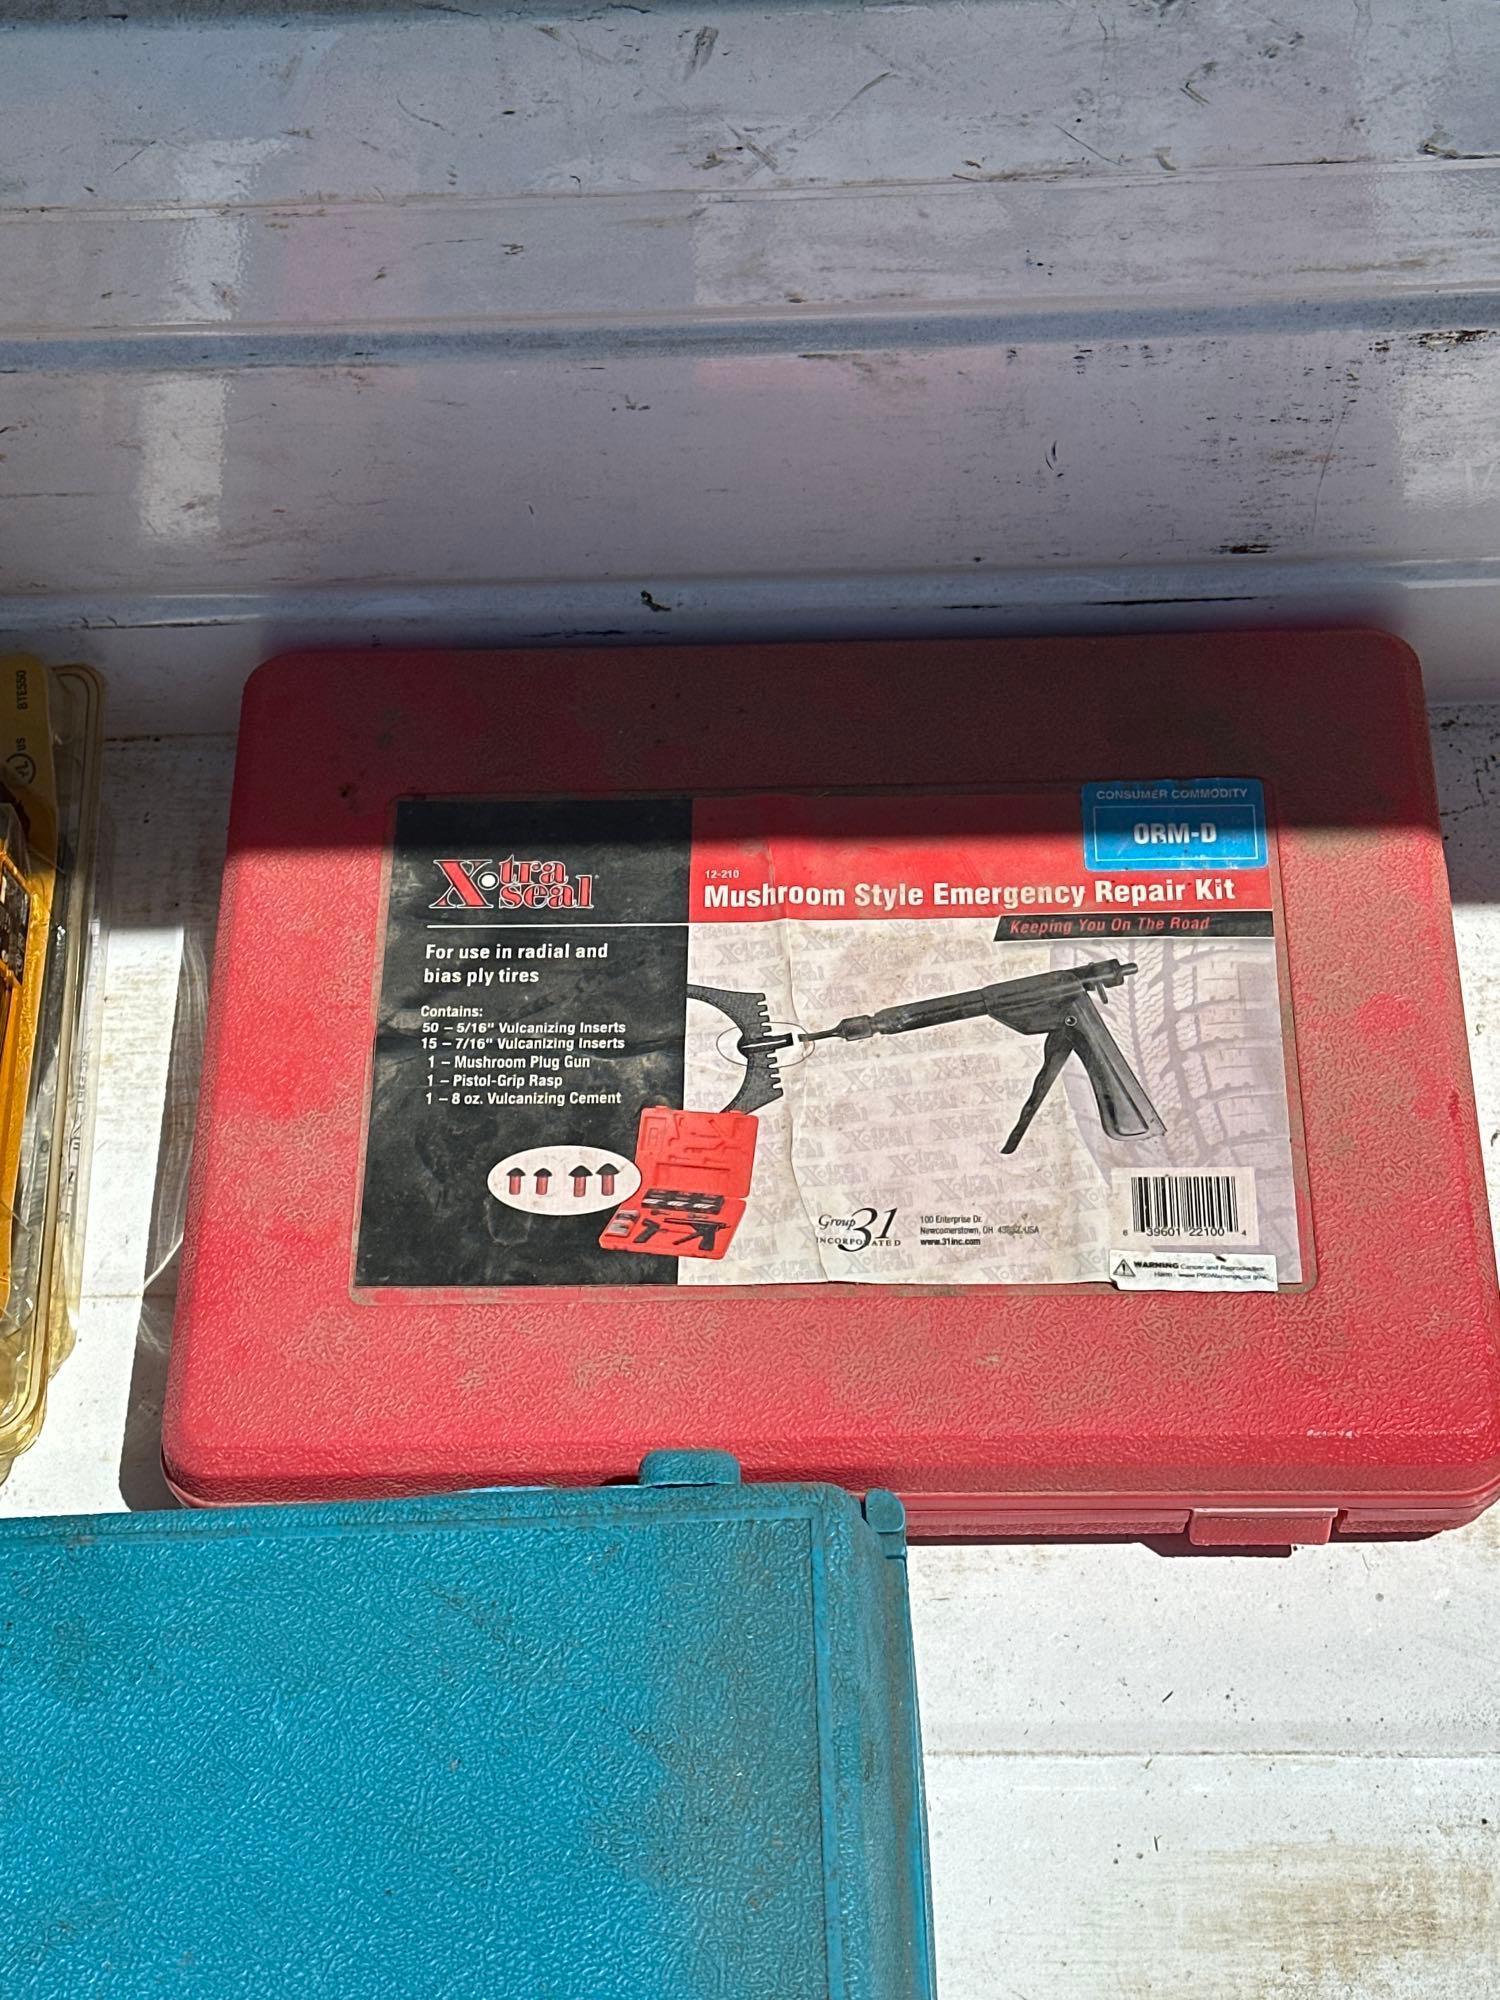 Toolbox with Contents - Makita Cut off Saw and Bosch Chargeable Tools